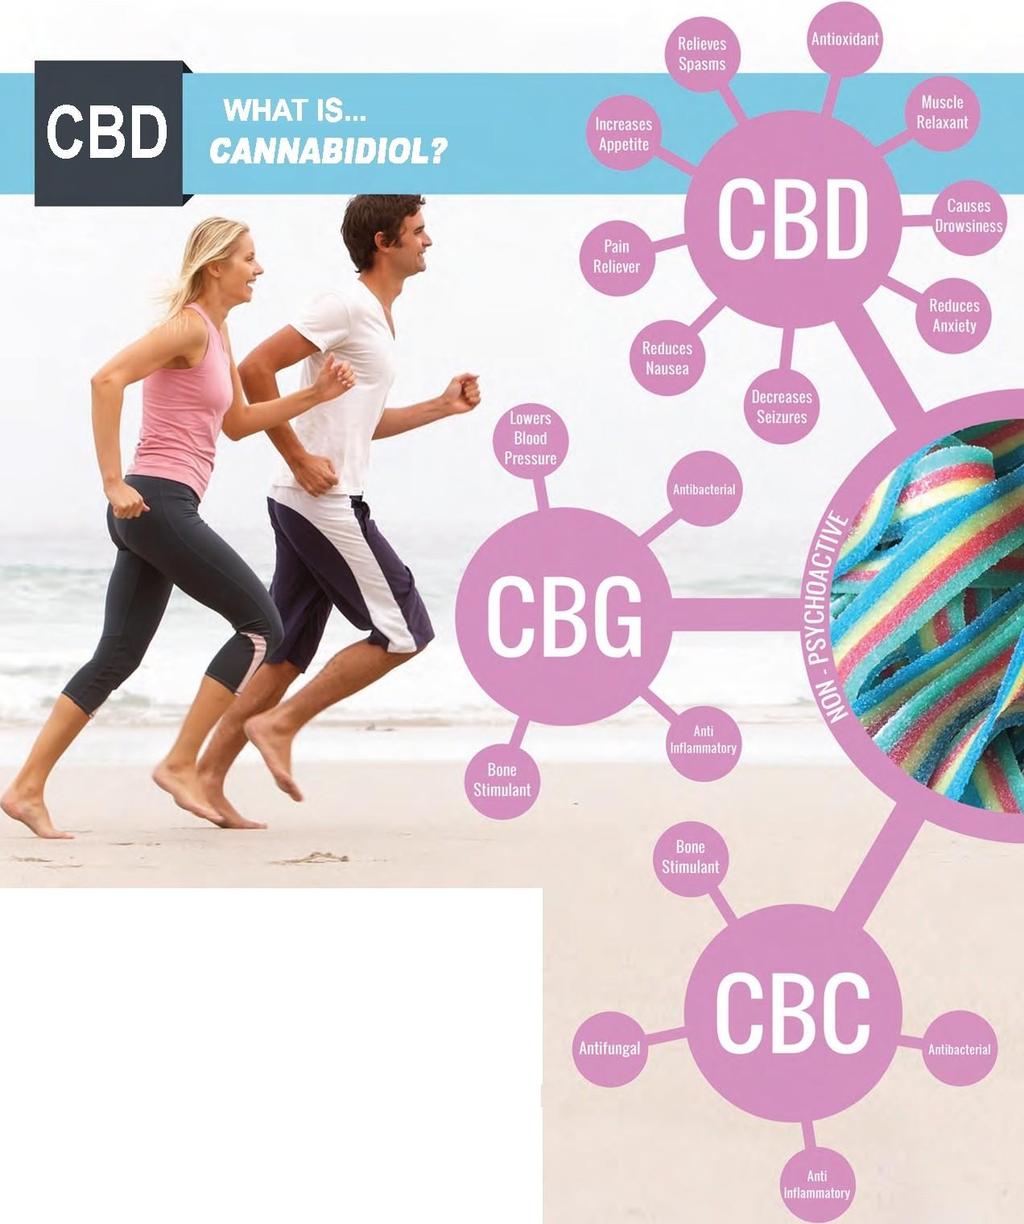 Cannabidiol (CBD) is one of the many cannabinoid compounds that the cannabis plant produces.